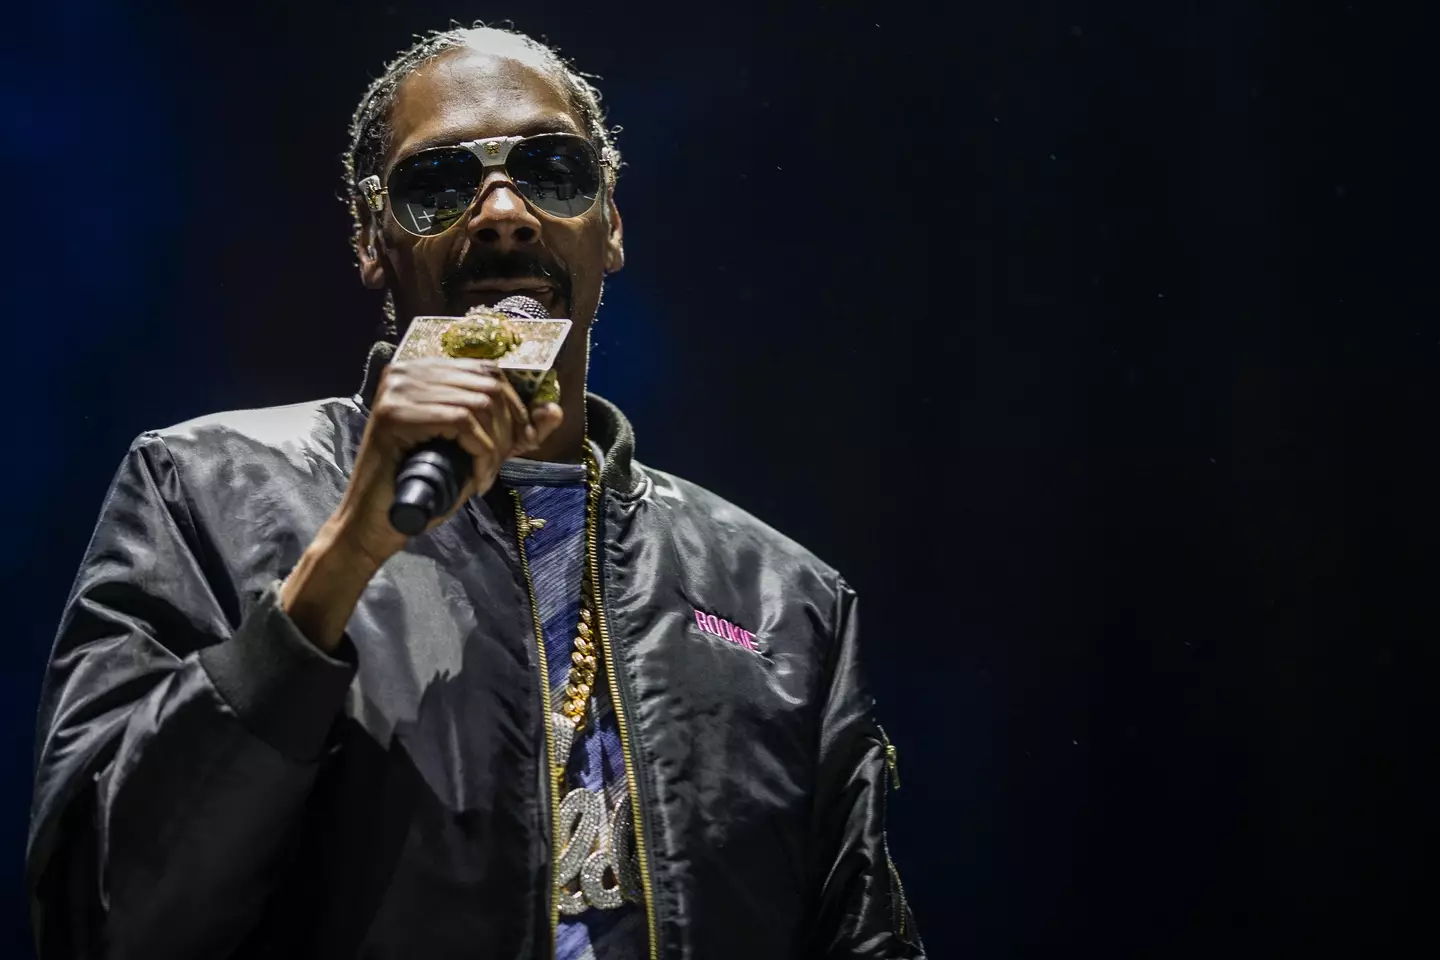 Snoop's life story will be retold on the big screen.